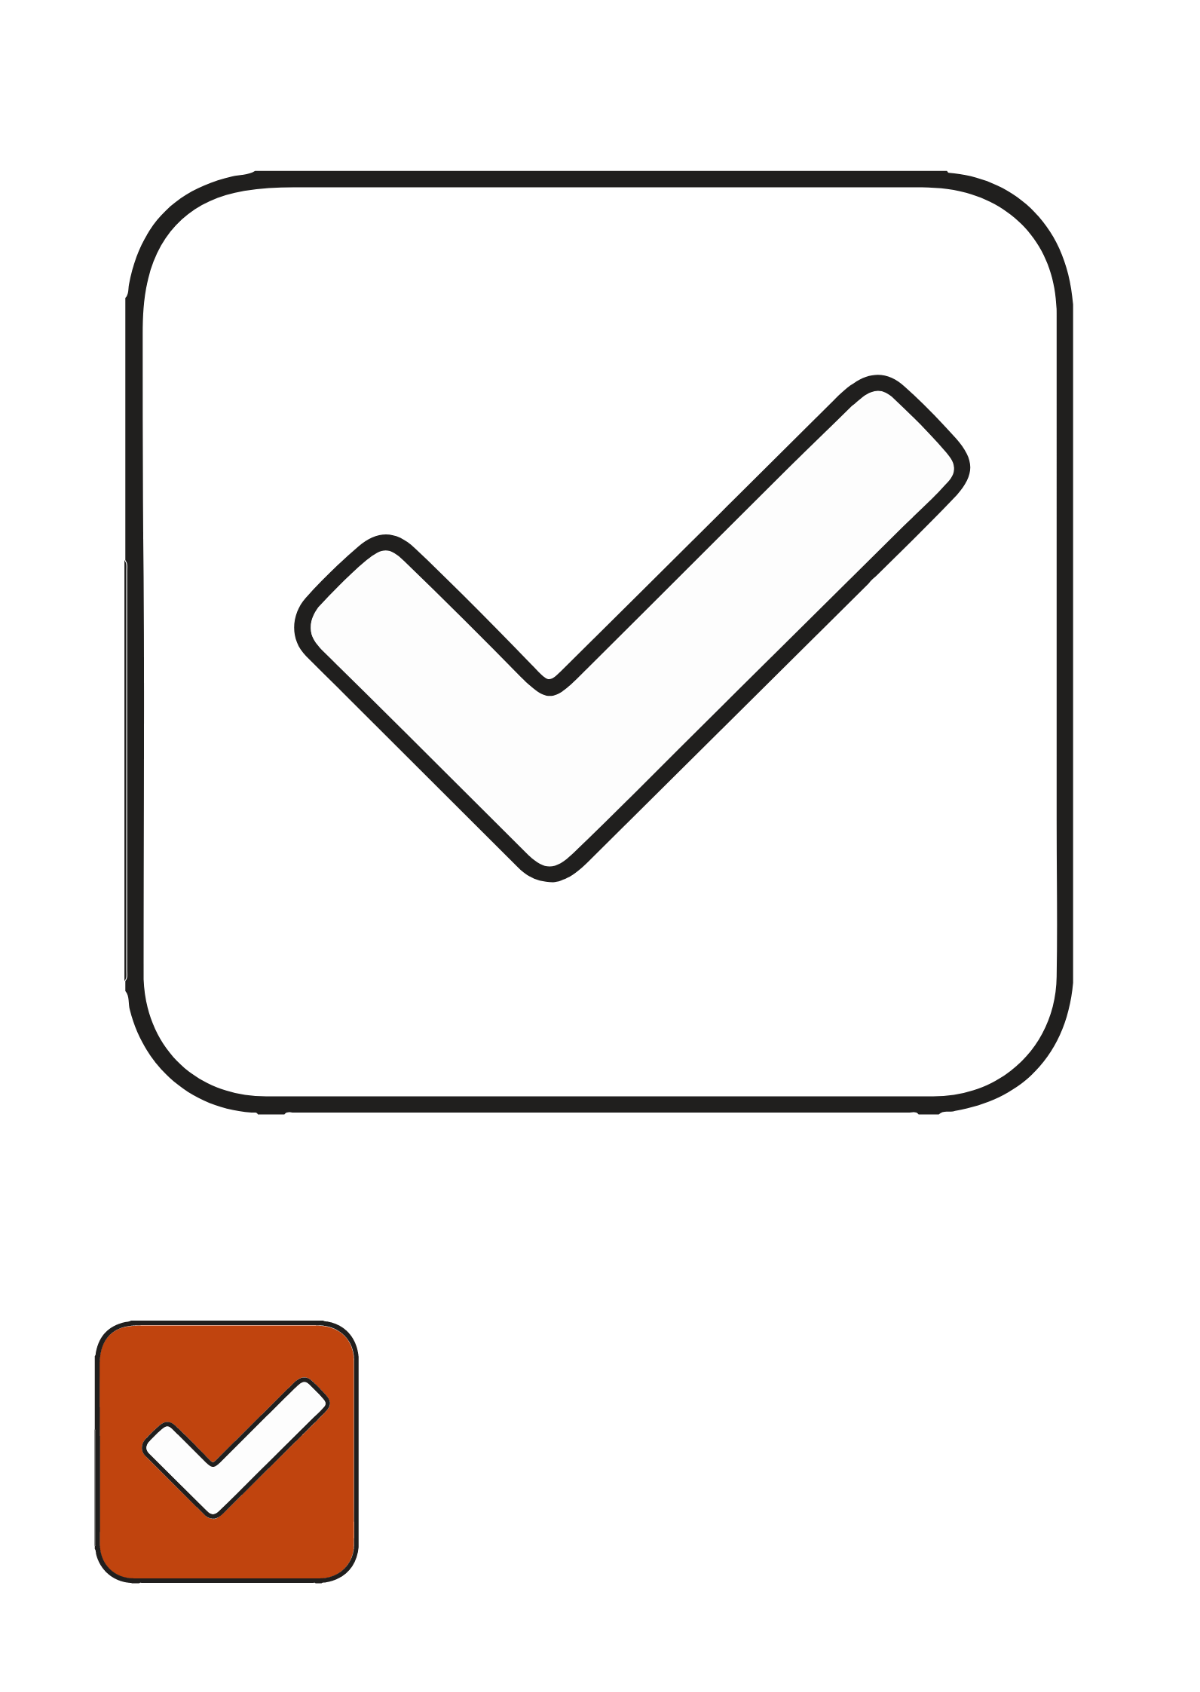 Checkbox Coloring Page Template